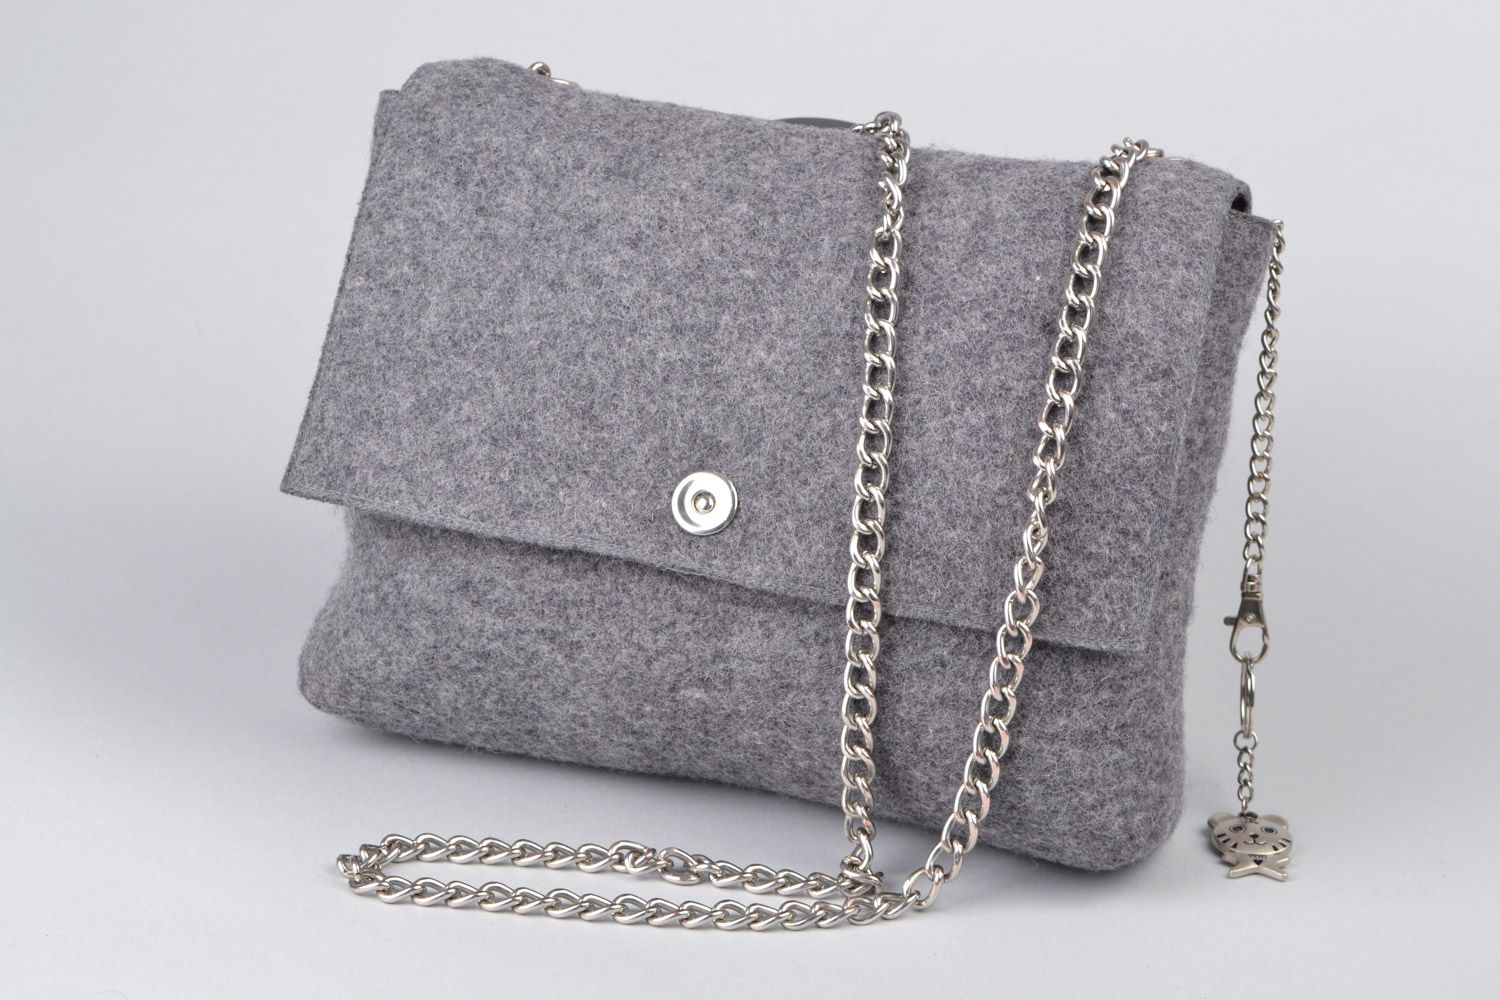 Handmade laconic handbag of gray color felted of wool with metal chain handle photo 2